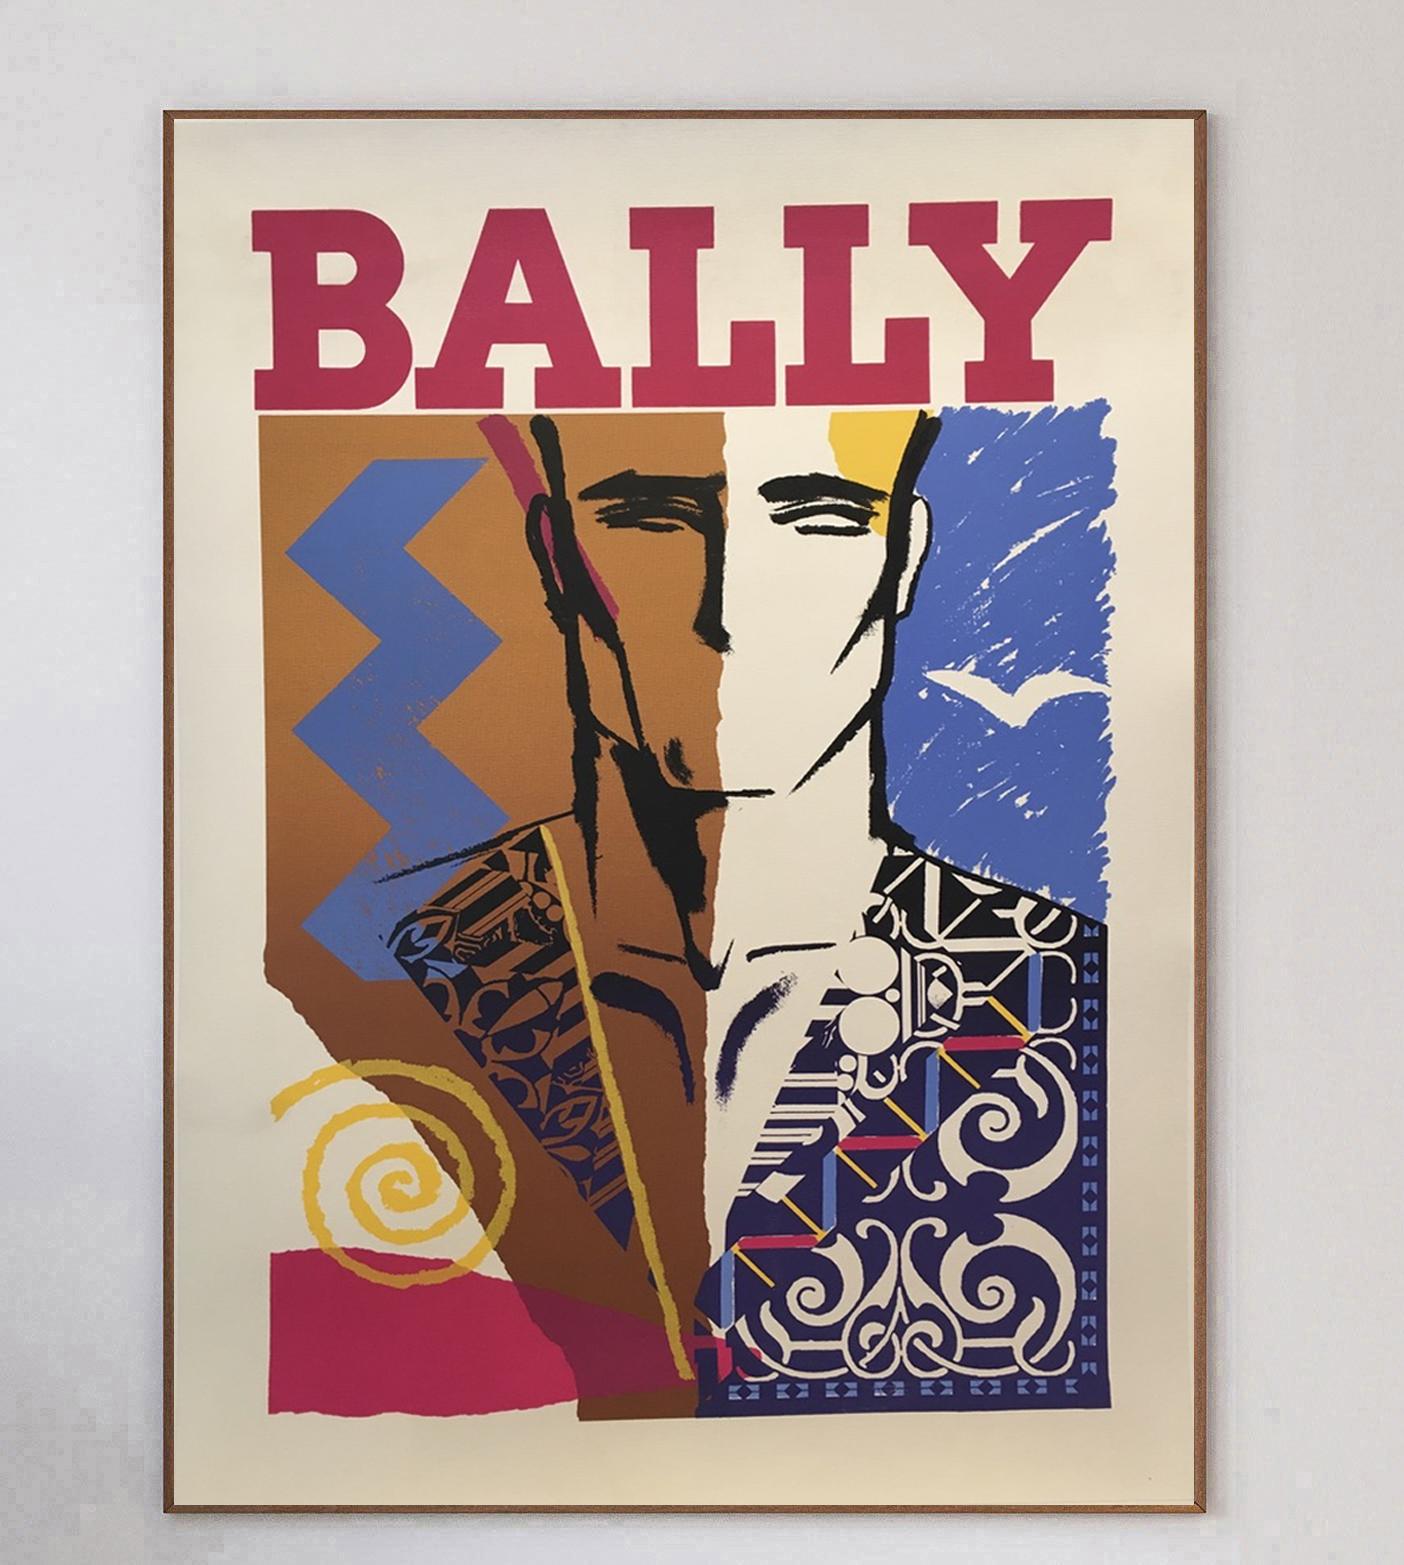 One of the most iconic and sought after designs of the 20th Century, the poster designs of Bally showcase the crossover between advertisement and fine art.

The luxury Swiss shoemaker worked with a range of esteemed poster artists such as Bernard